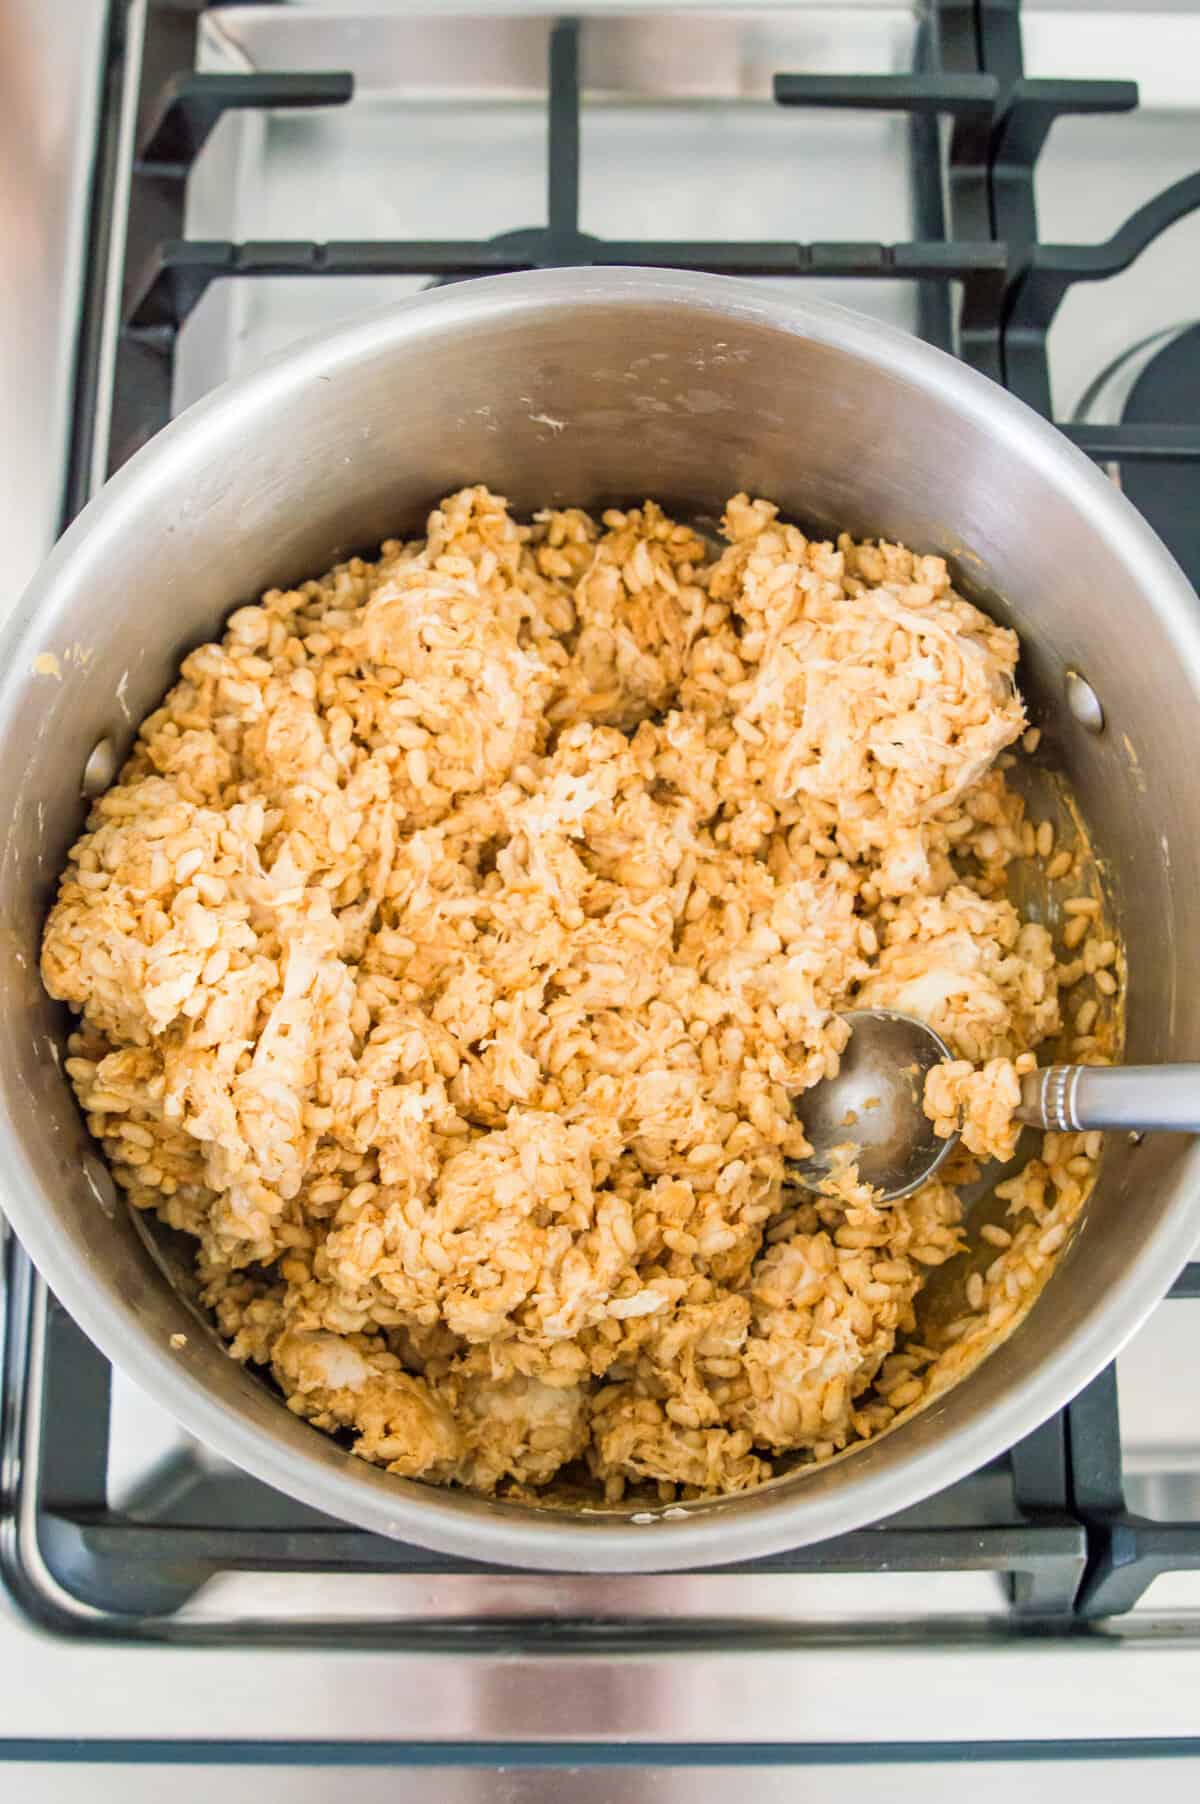 A large pot on the stovetop with rice crispy cereal in it coated in a melted marshmallow and peanut butter mixture.